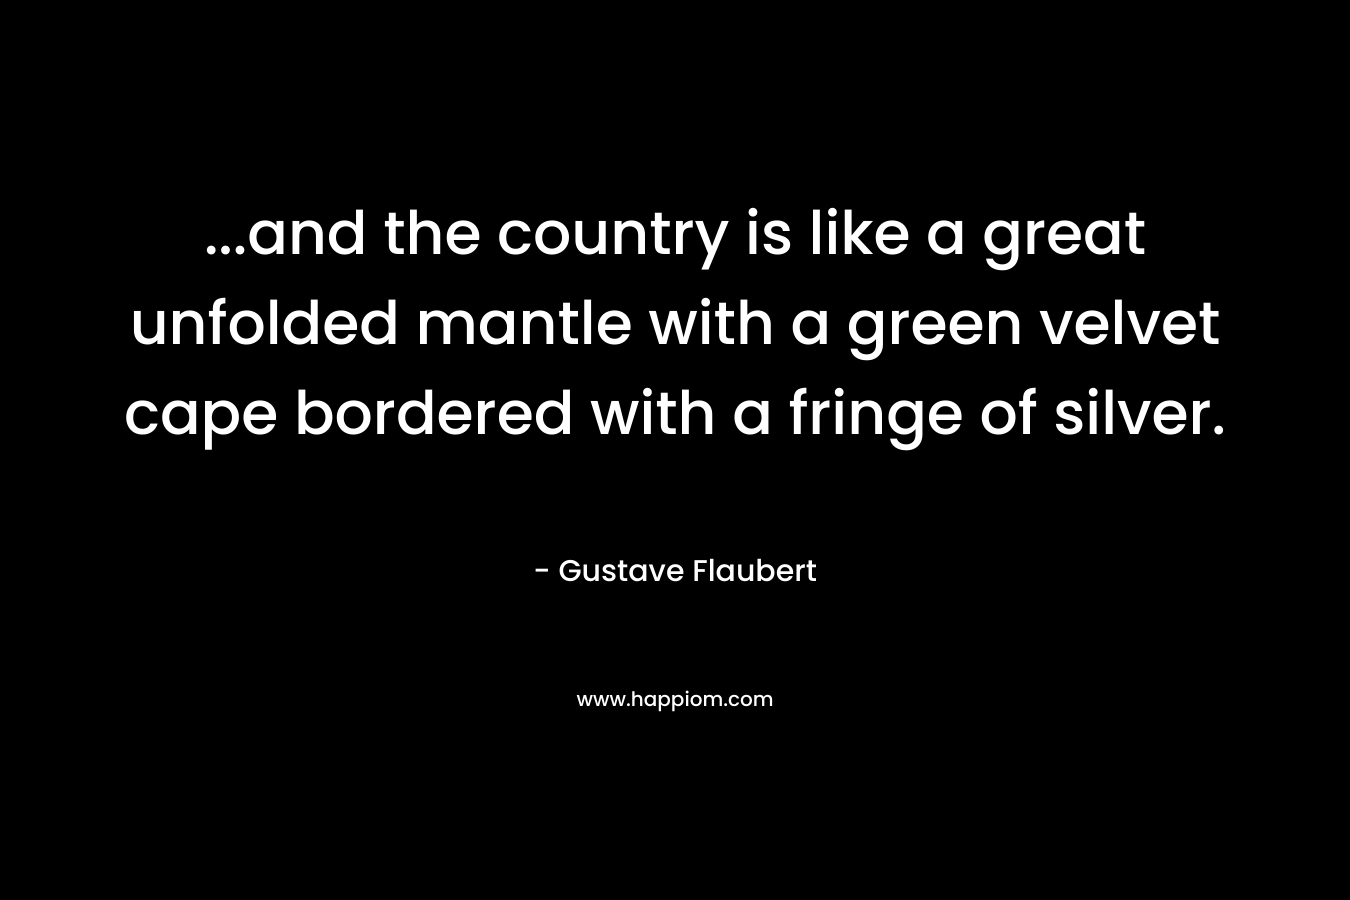 ...and the country is like a great unfolded mantle with a green velvet cape bordered with a fringe of silver.